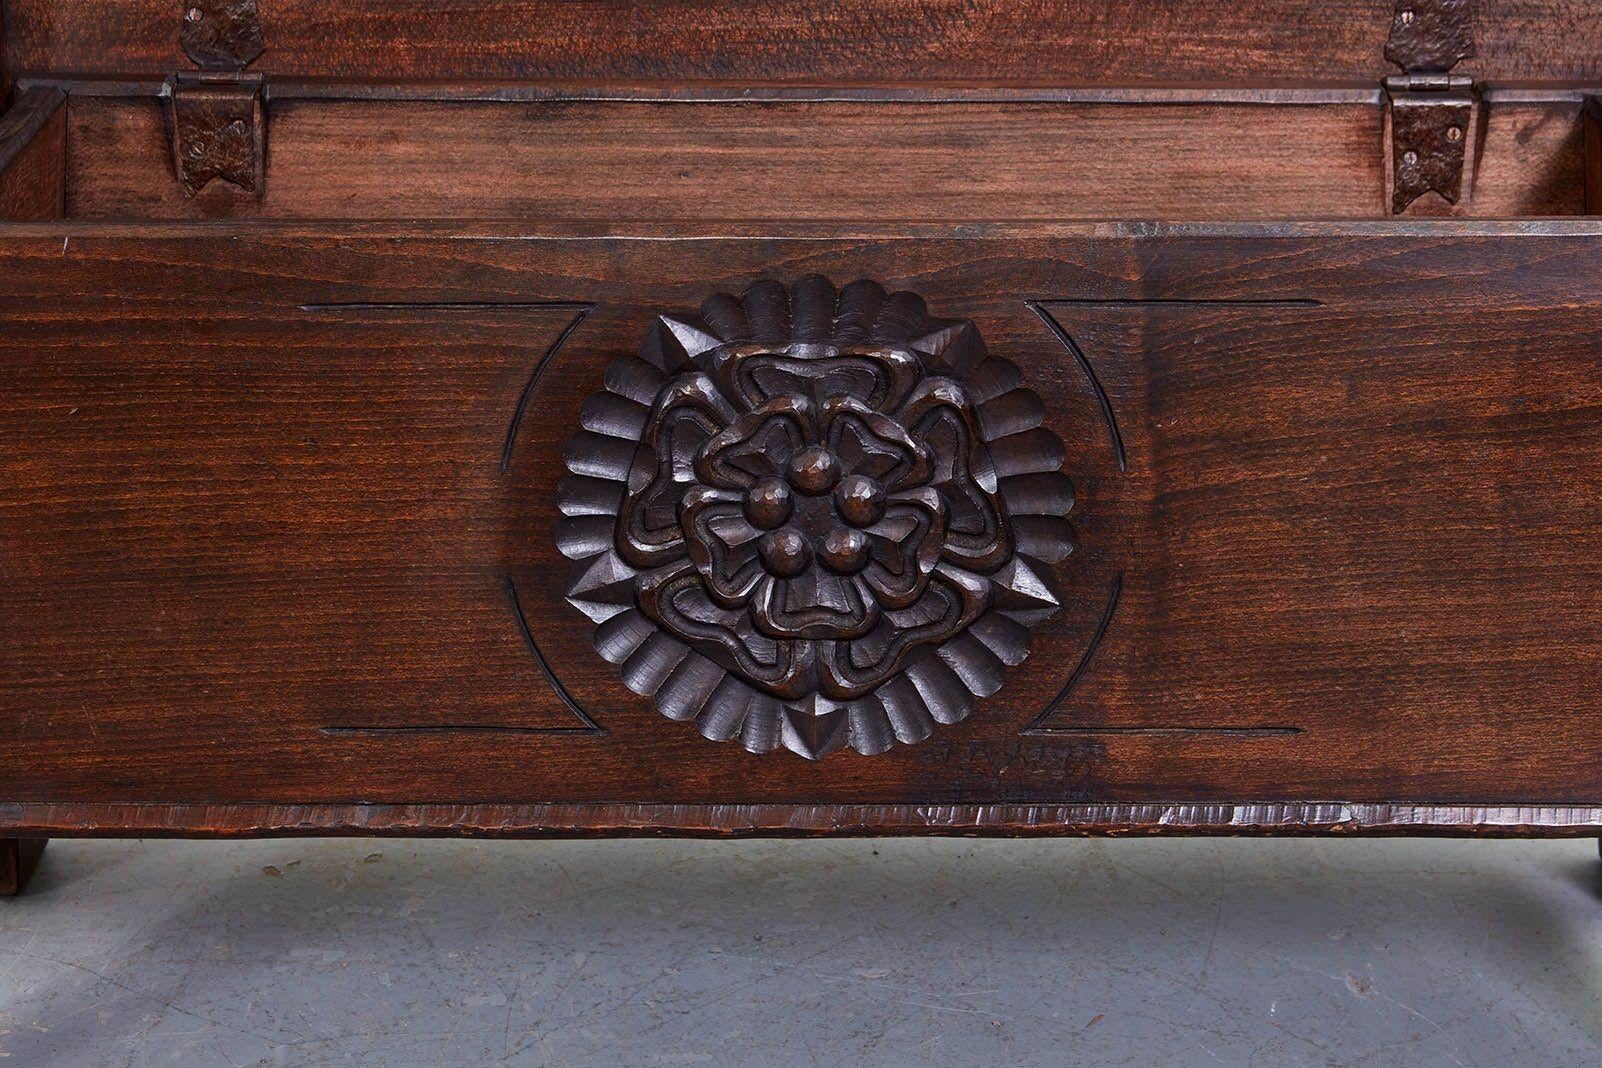 A small coffee table or chest carved with a tudor rose to the front, and having a flat lift top over canted sides with integral arch feet. The whole constructed in the traditional manner, Norfolk school, with dovetail joints and heavy wrought iron